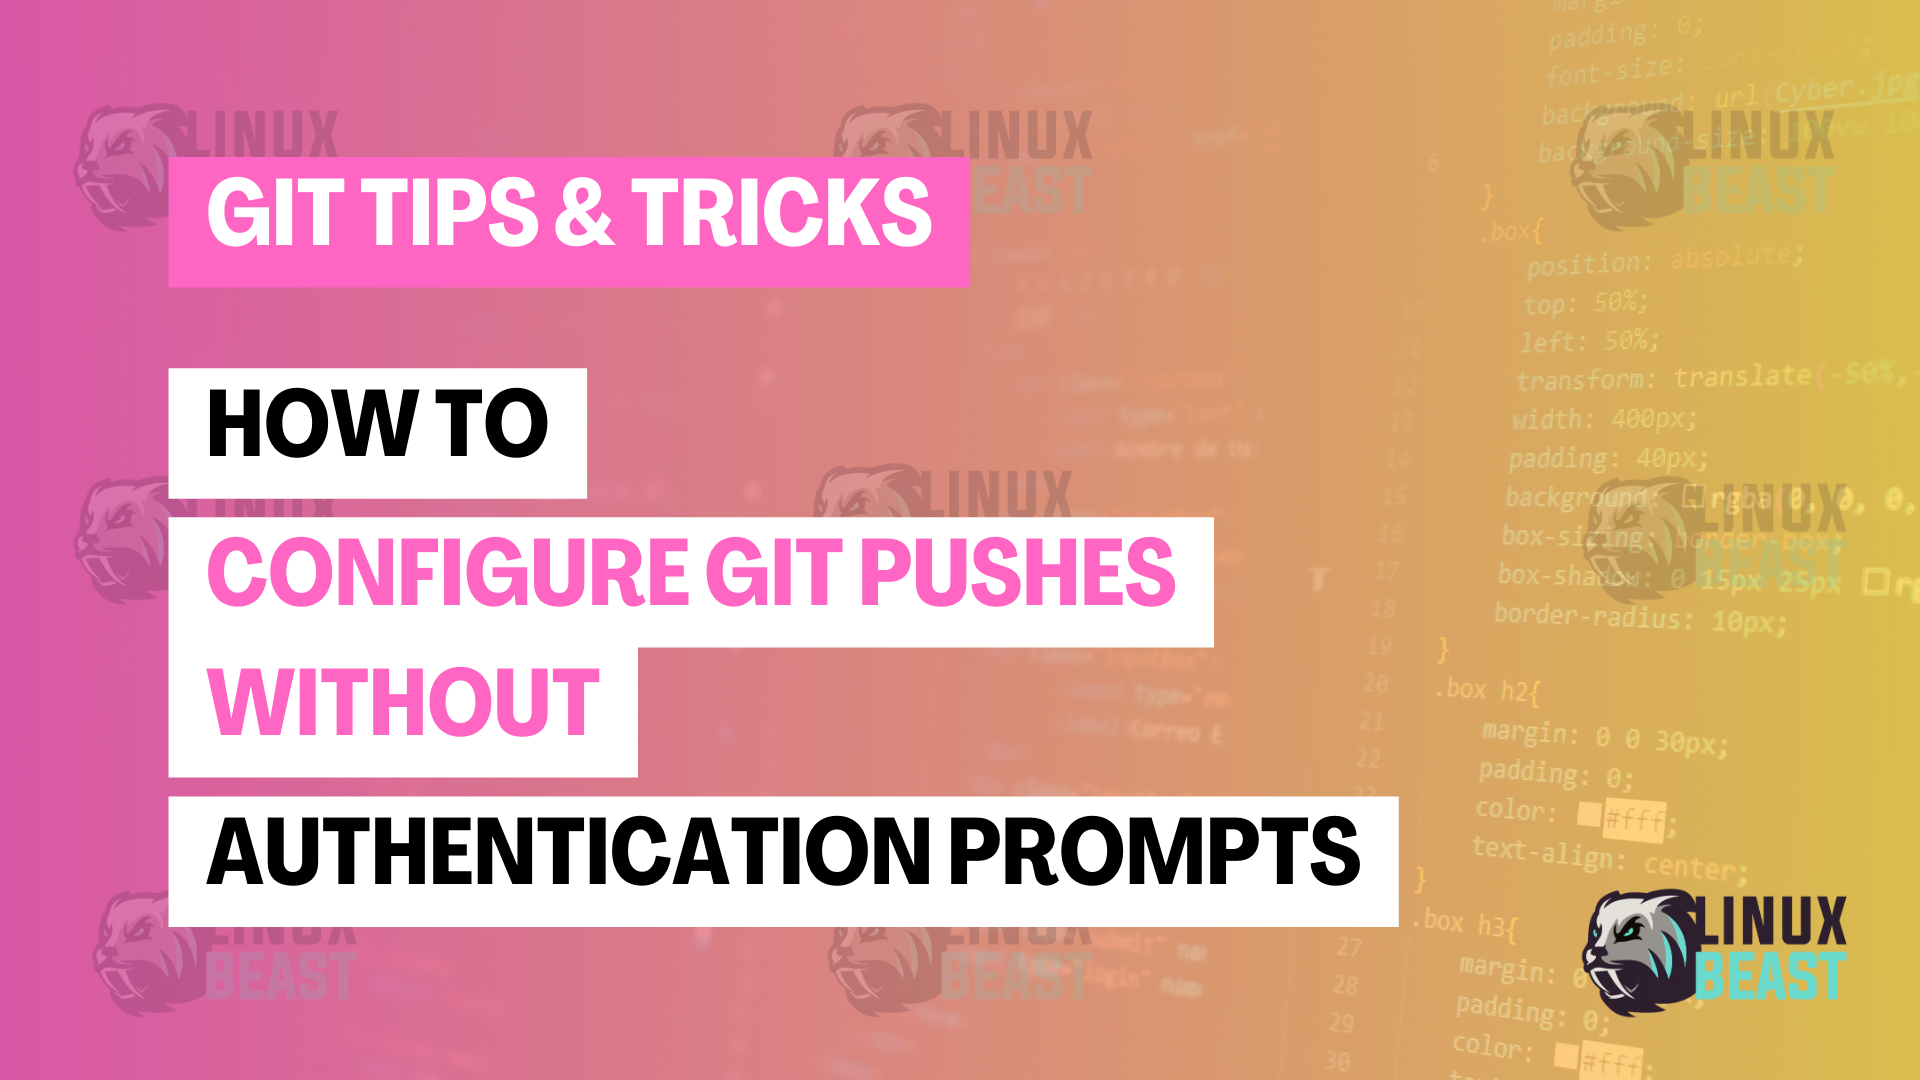 How to Configure Git Pushes Without Authentication Prompts